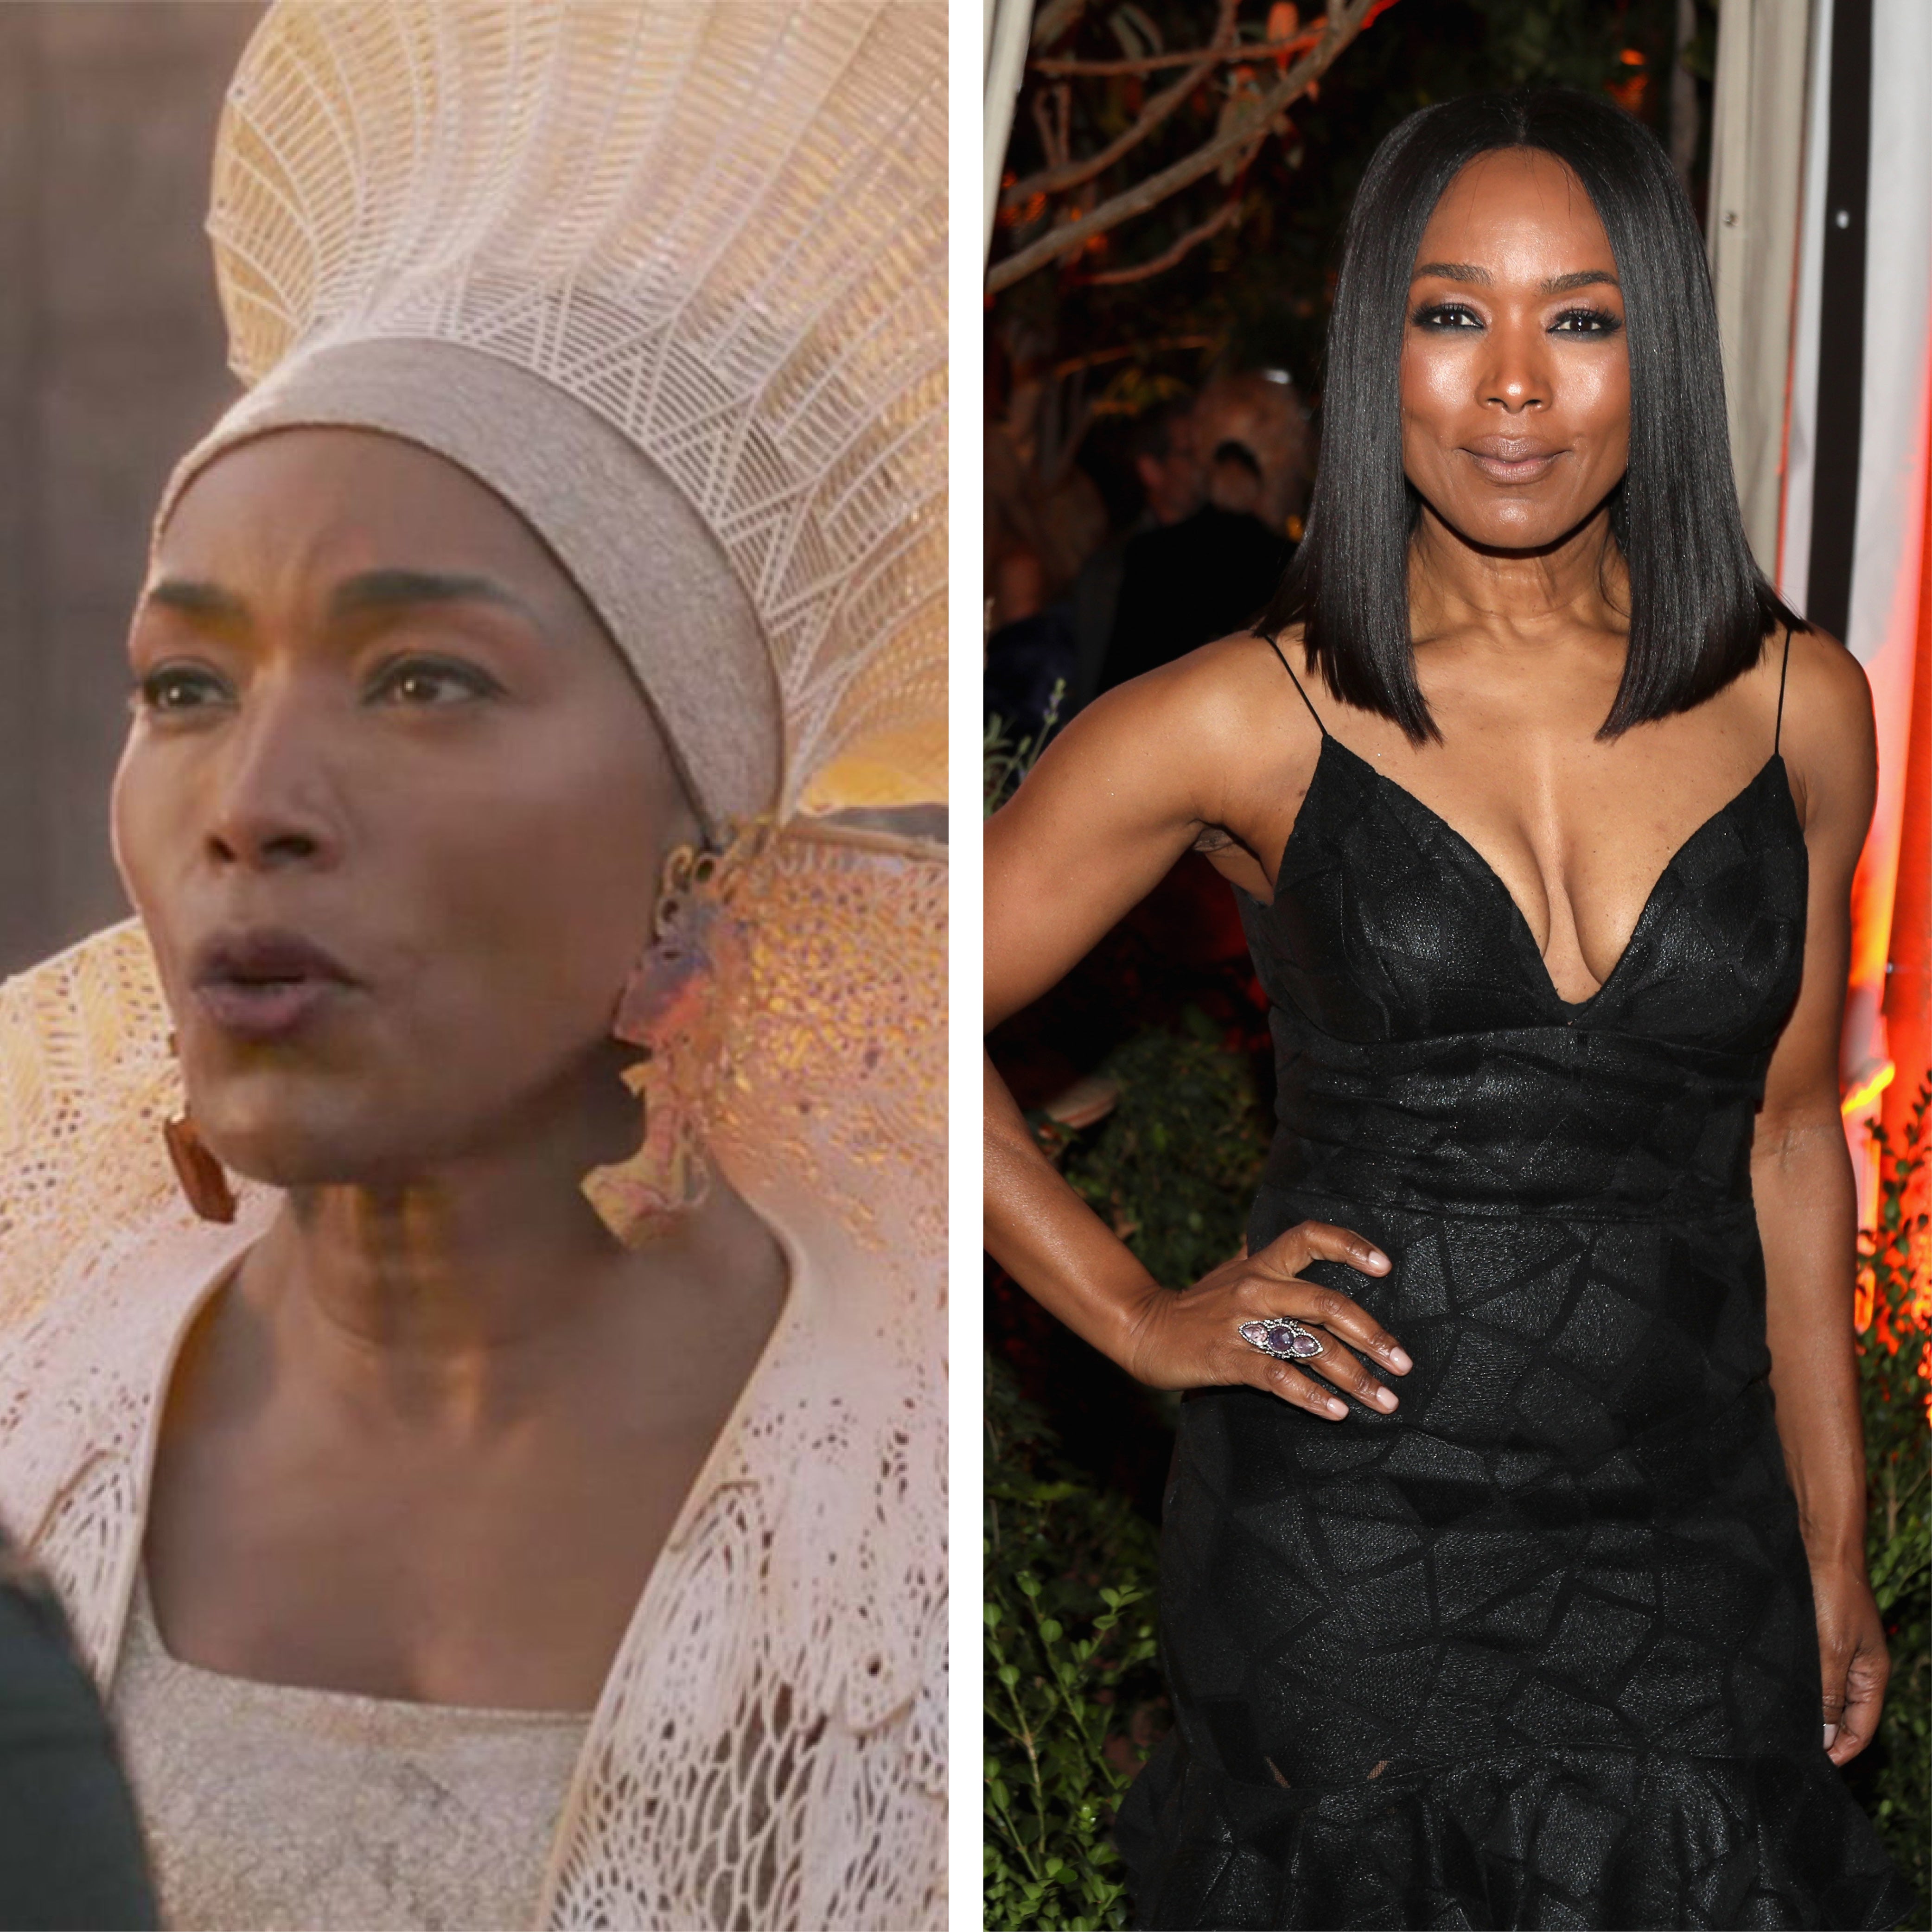 Wakanda Wikipedia: Who's Who In The 'Black Panther' Movie?
